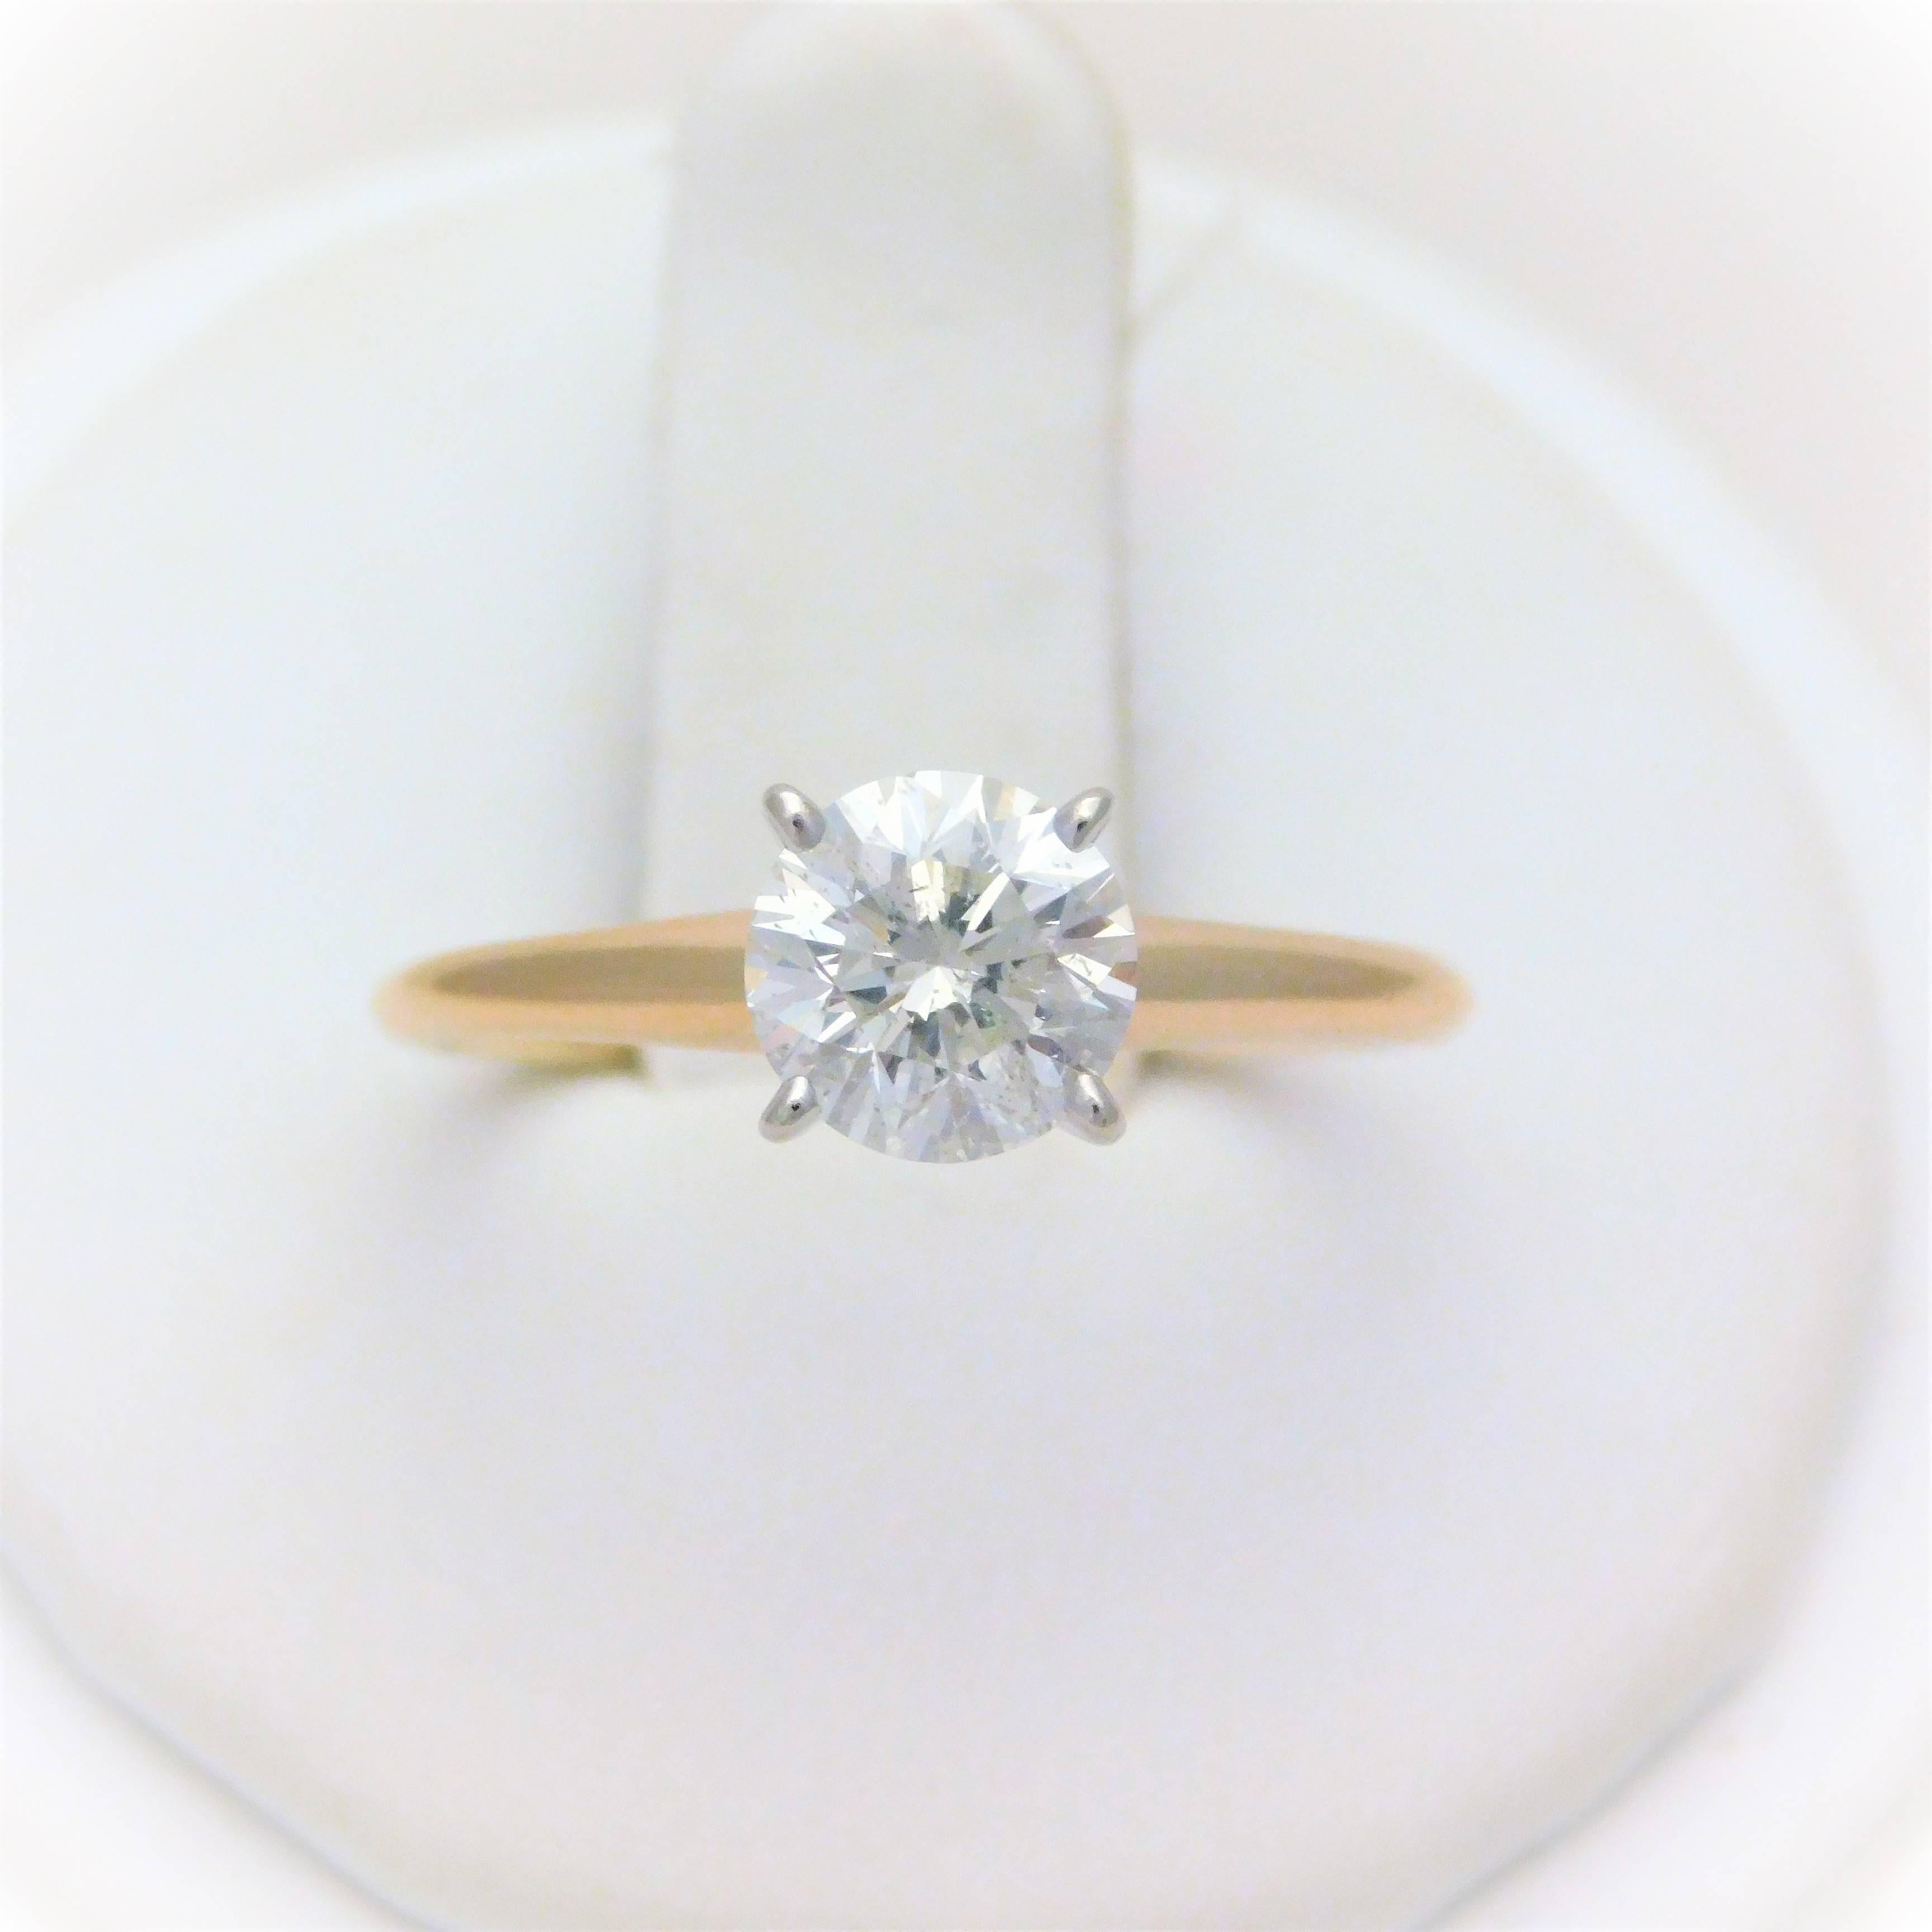 Made famous by Tiffany and Co., The solitaire round diamond engagement ring is the most classic designs in the world.  It’s simplicity allows the diamond to shine as the main attraction.  No distracting accents.  It is truly a timeless setting.  